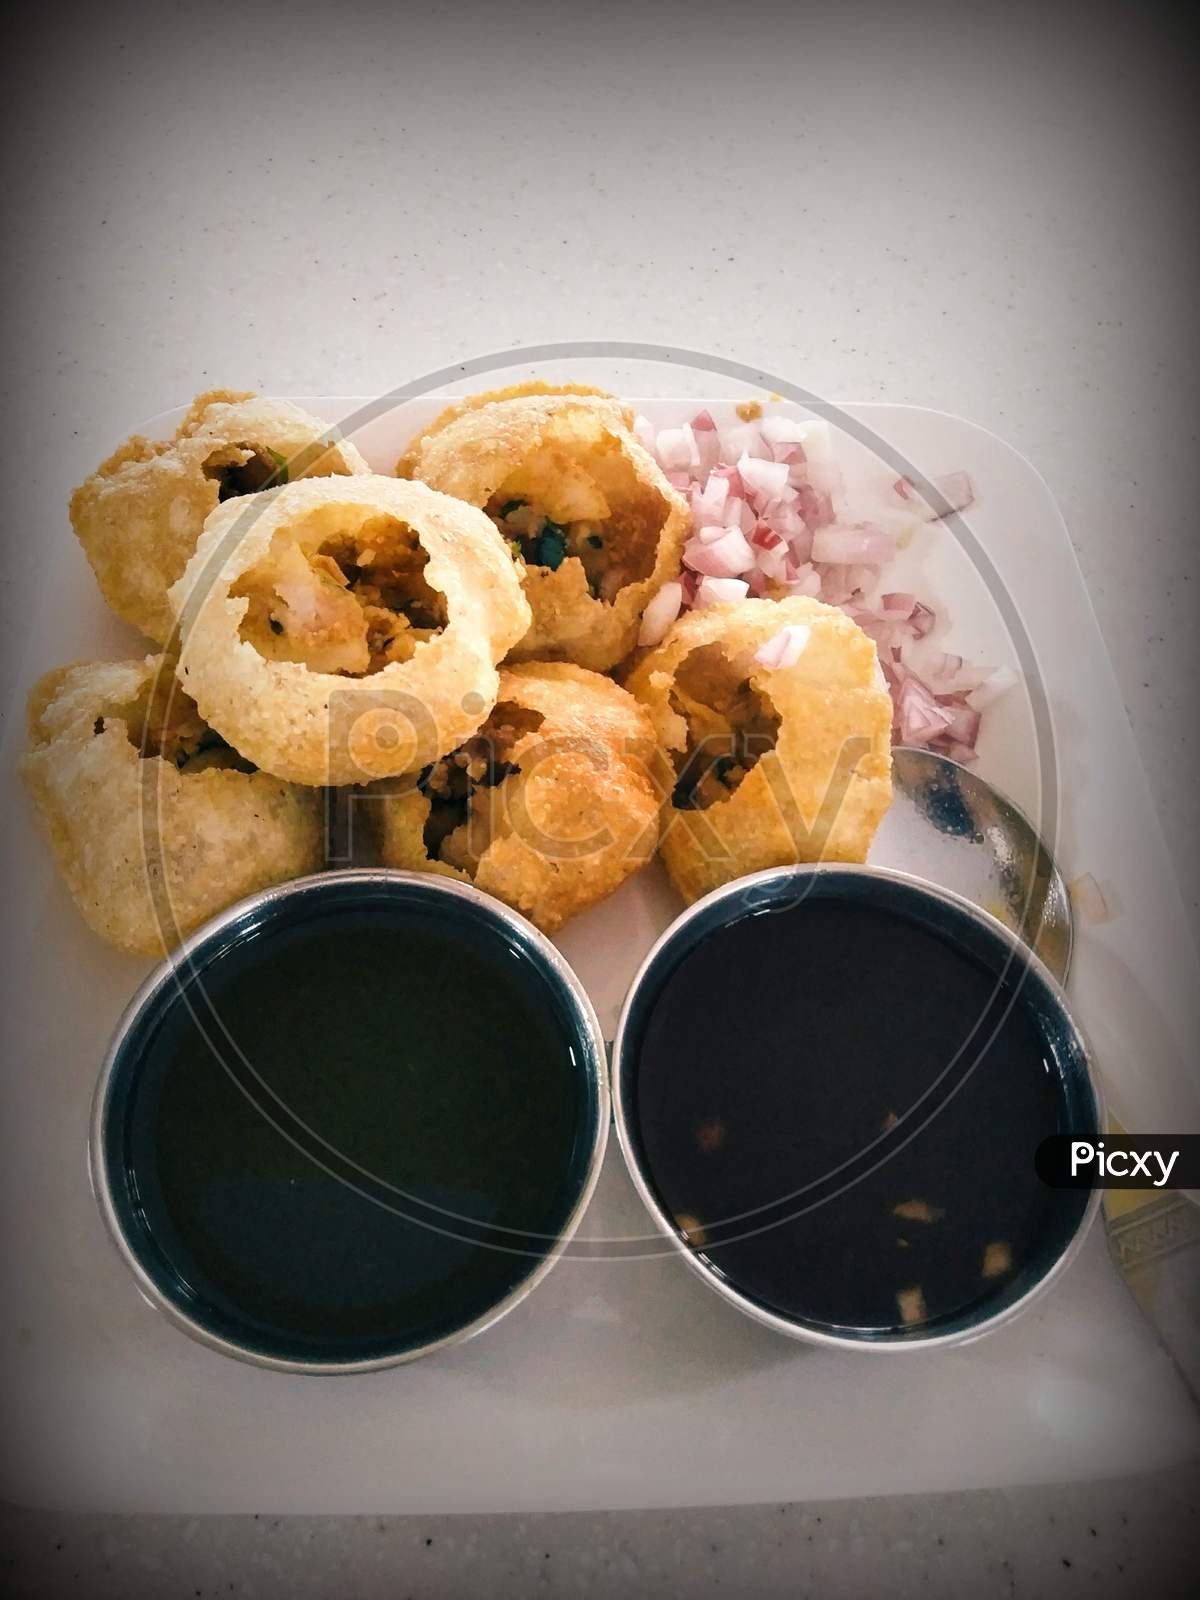 Sweet And Spicey Panipuri With Different Chutney And Onions And Stuffing On White Plate With Spoon